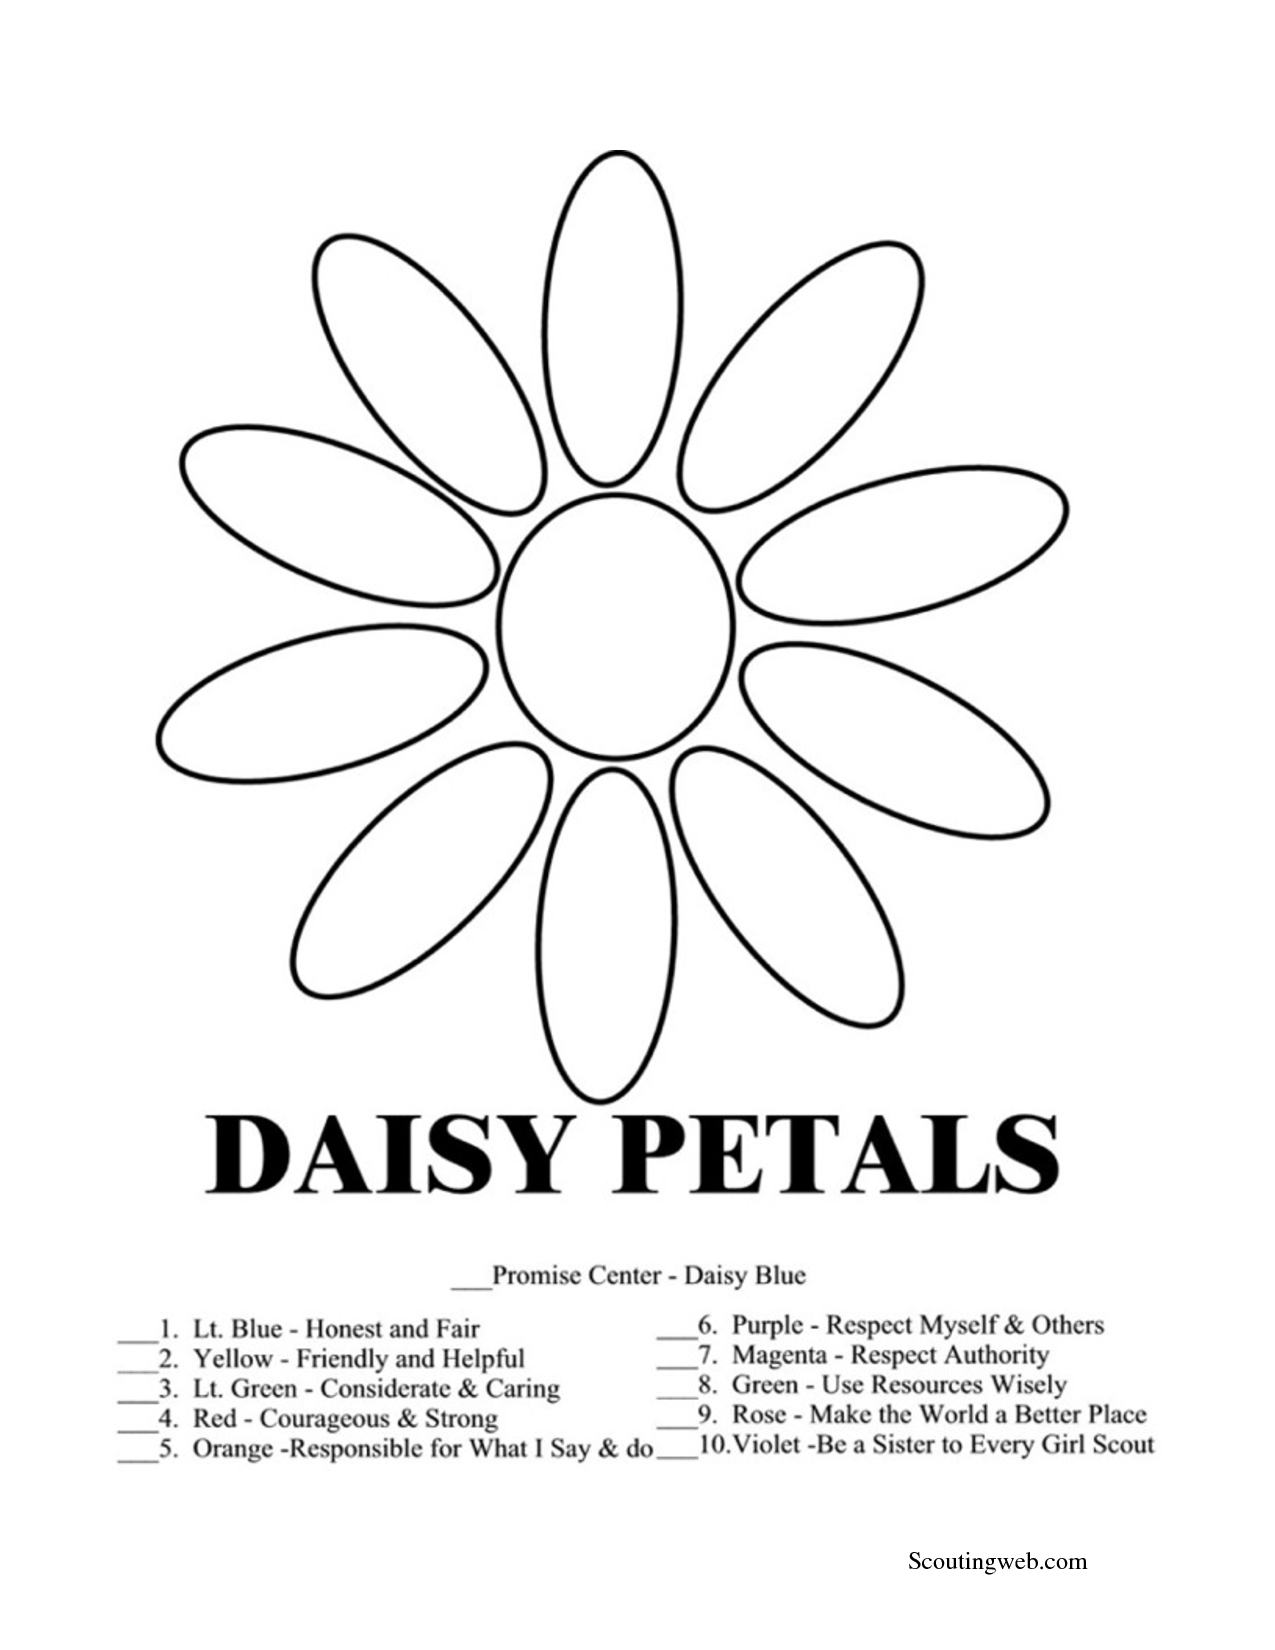 Free Daisy Coloring Pages - Greatindex.net